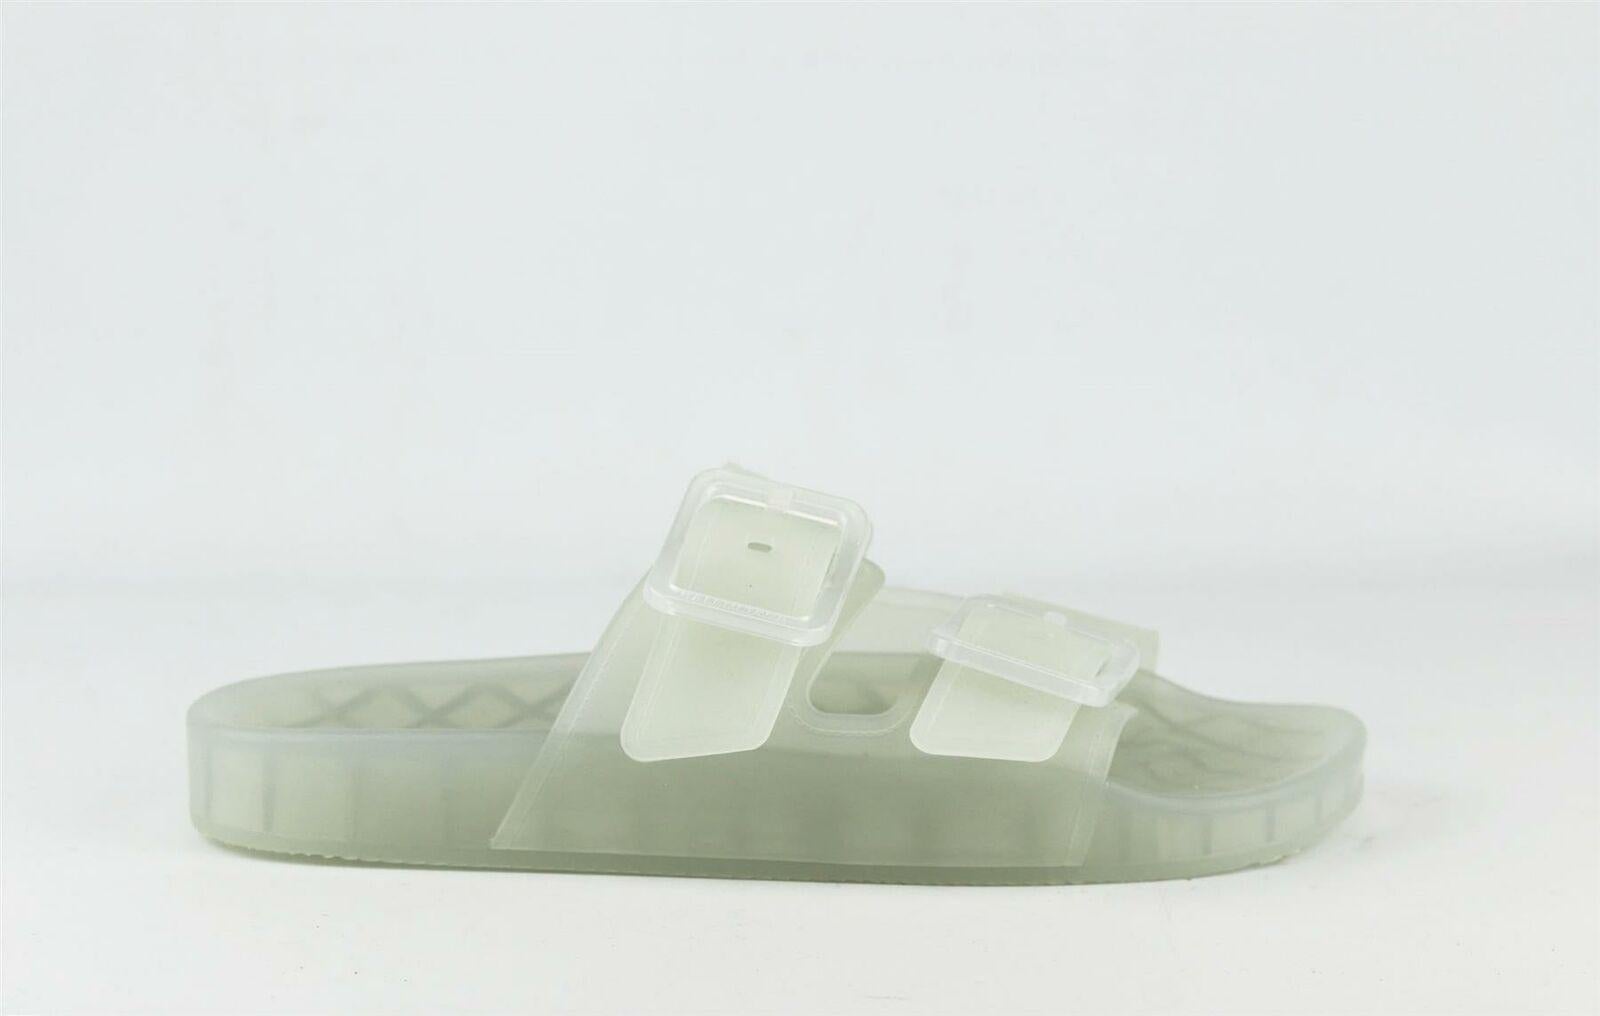 The Balenciaga slides are topped with buckles, they've been made in Italy from translucent rubber and have comfortable molded footbeds and thick soles.
Sole measures approximately 15mm/ 0.5 inches.
Translucent rubber.
Slip on.
Does not come with box